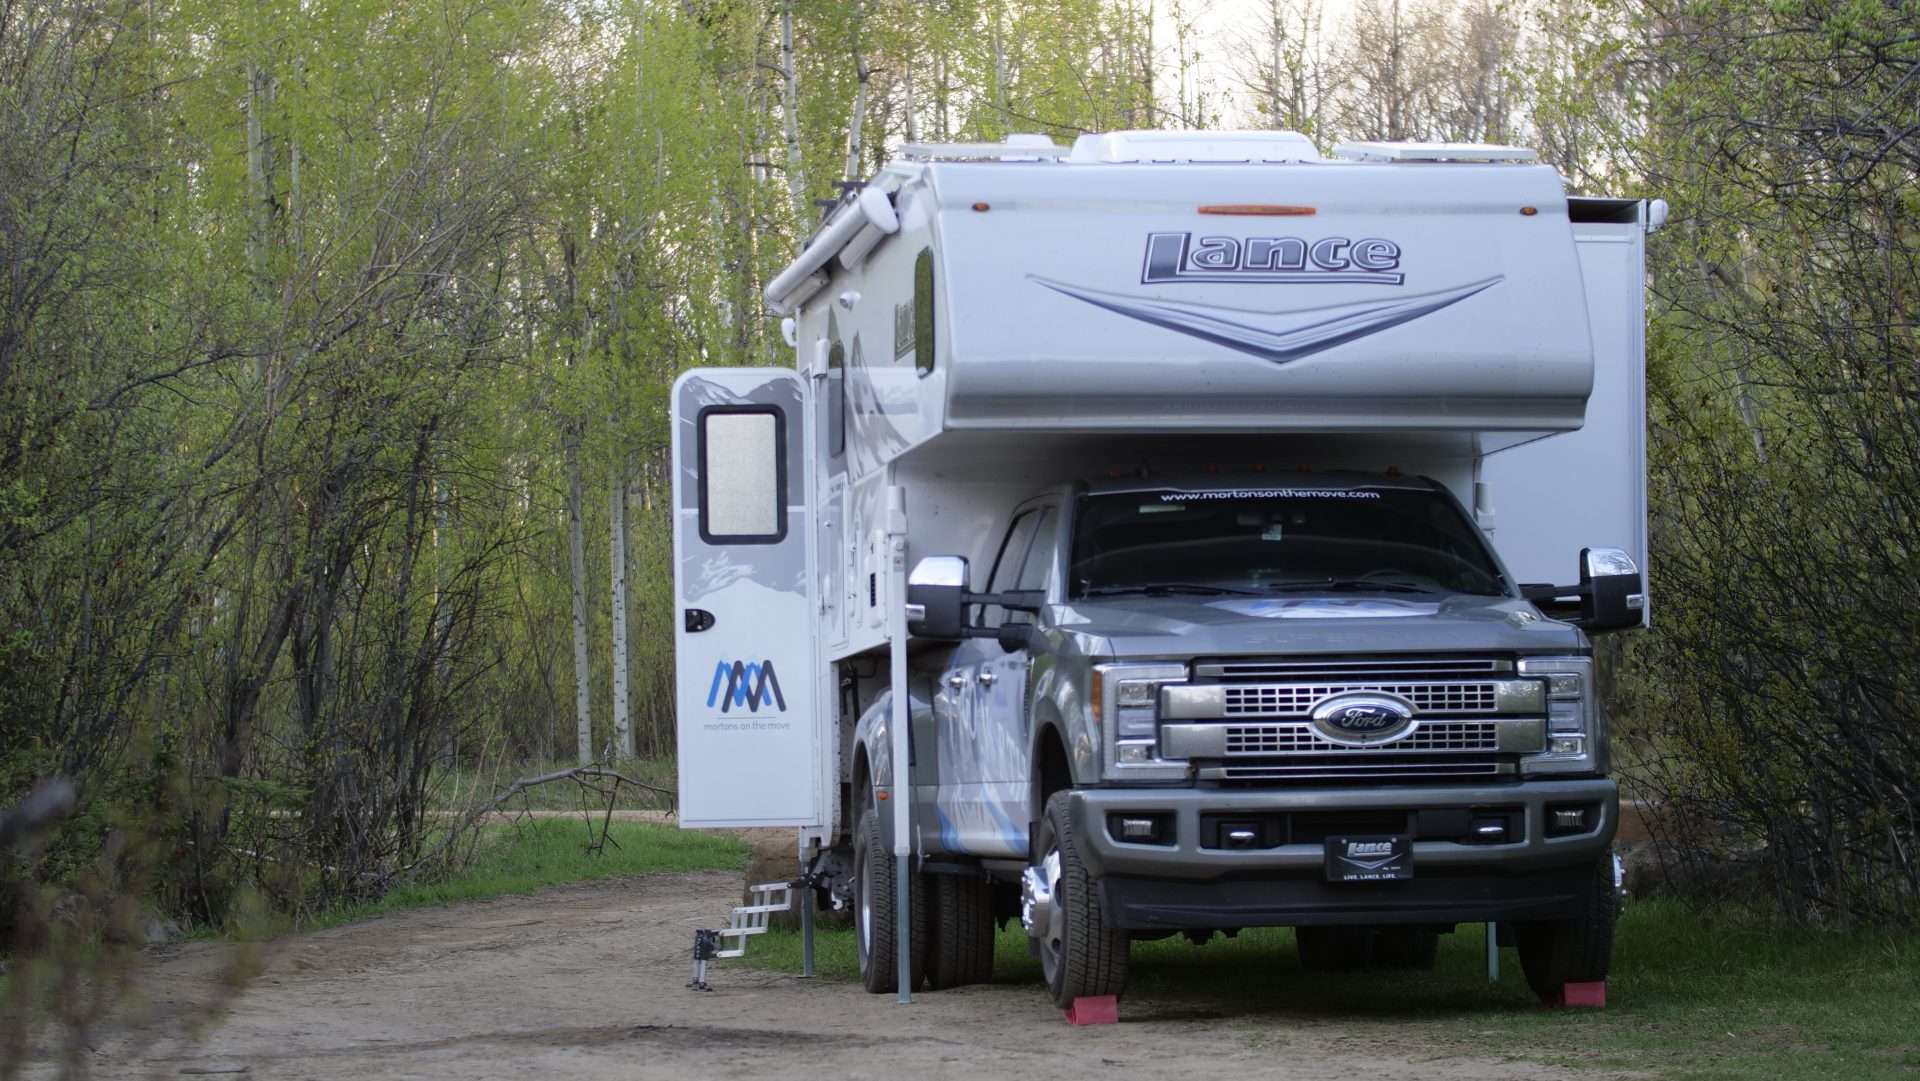 Mortons on the Move Lance truck camper